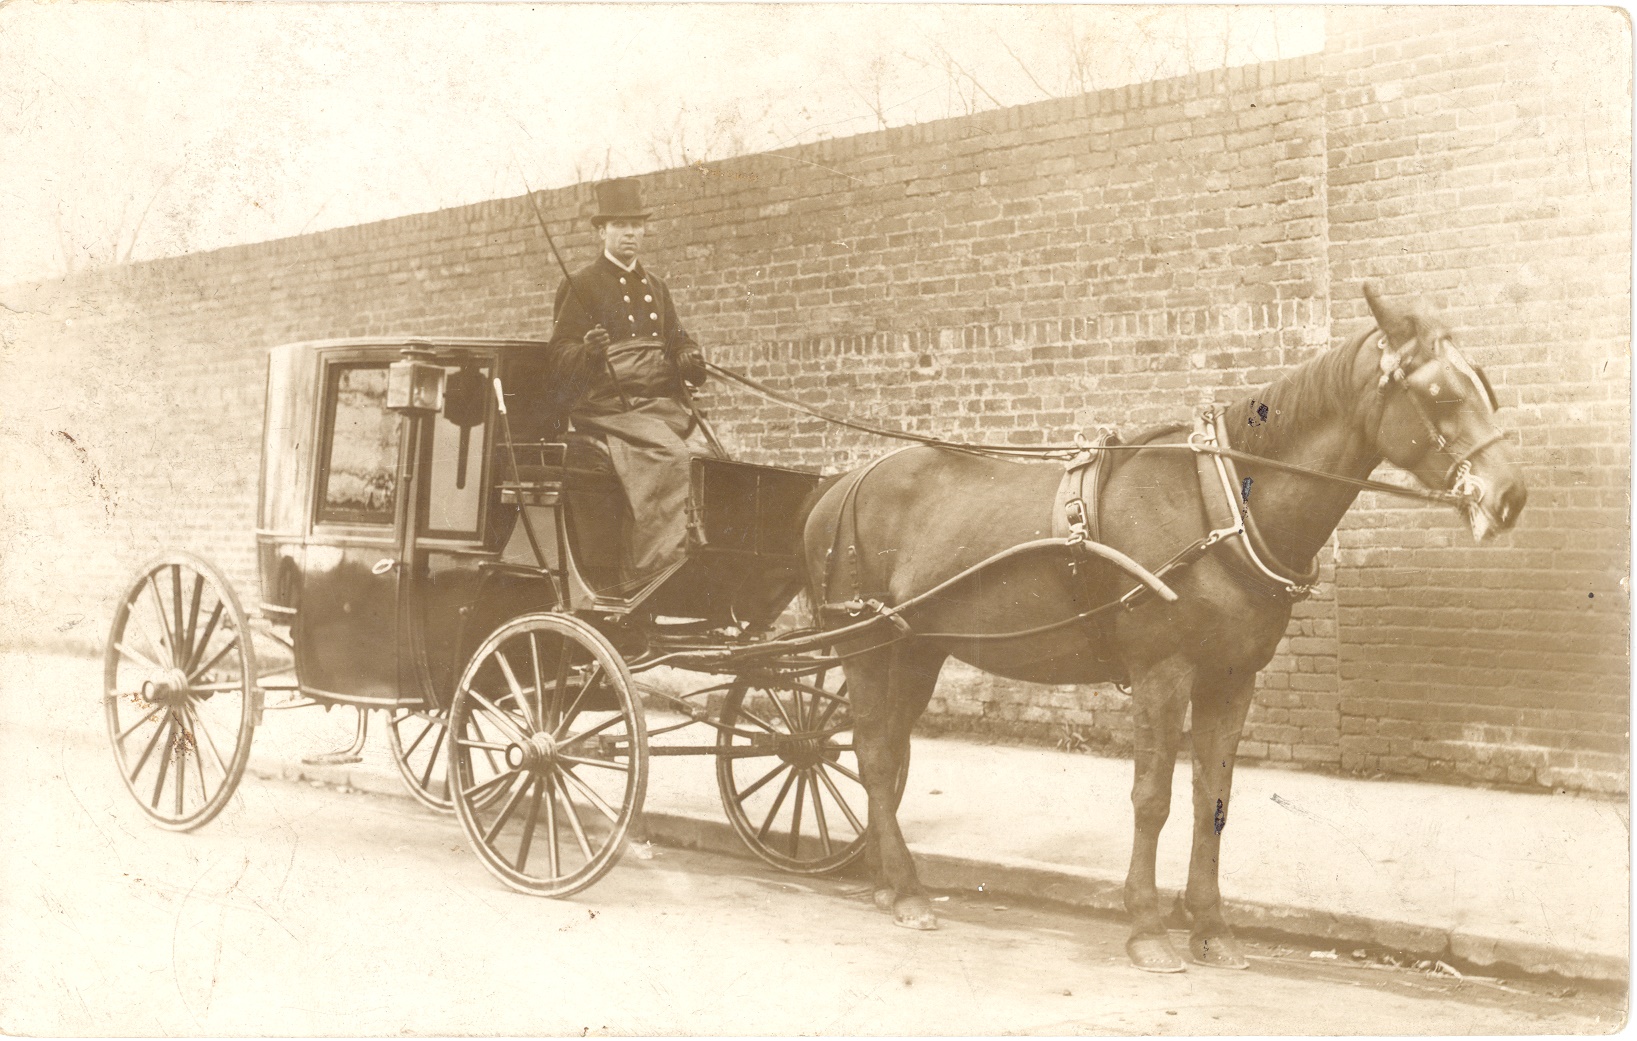 Mr Nugus driving a horse-drawn cab from Weybridge station, 1918. He worked for Eli Boxall, who was a fly-proprietor.